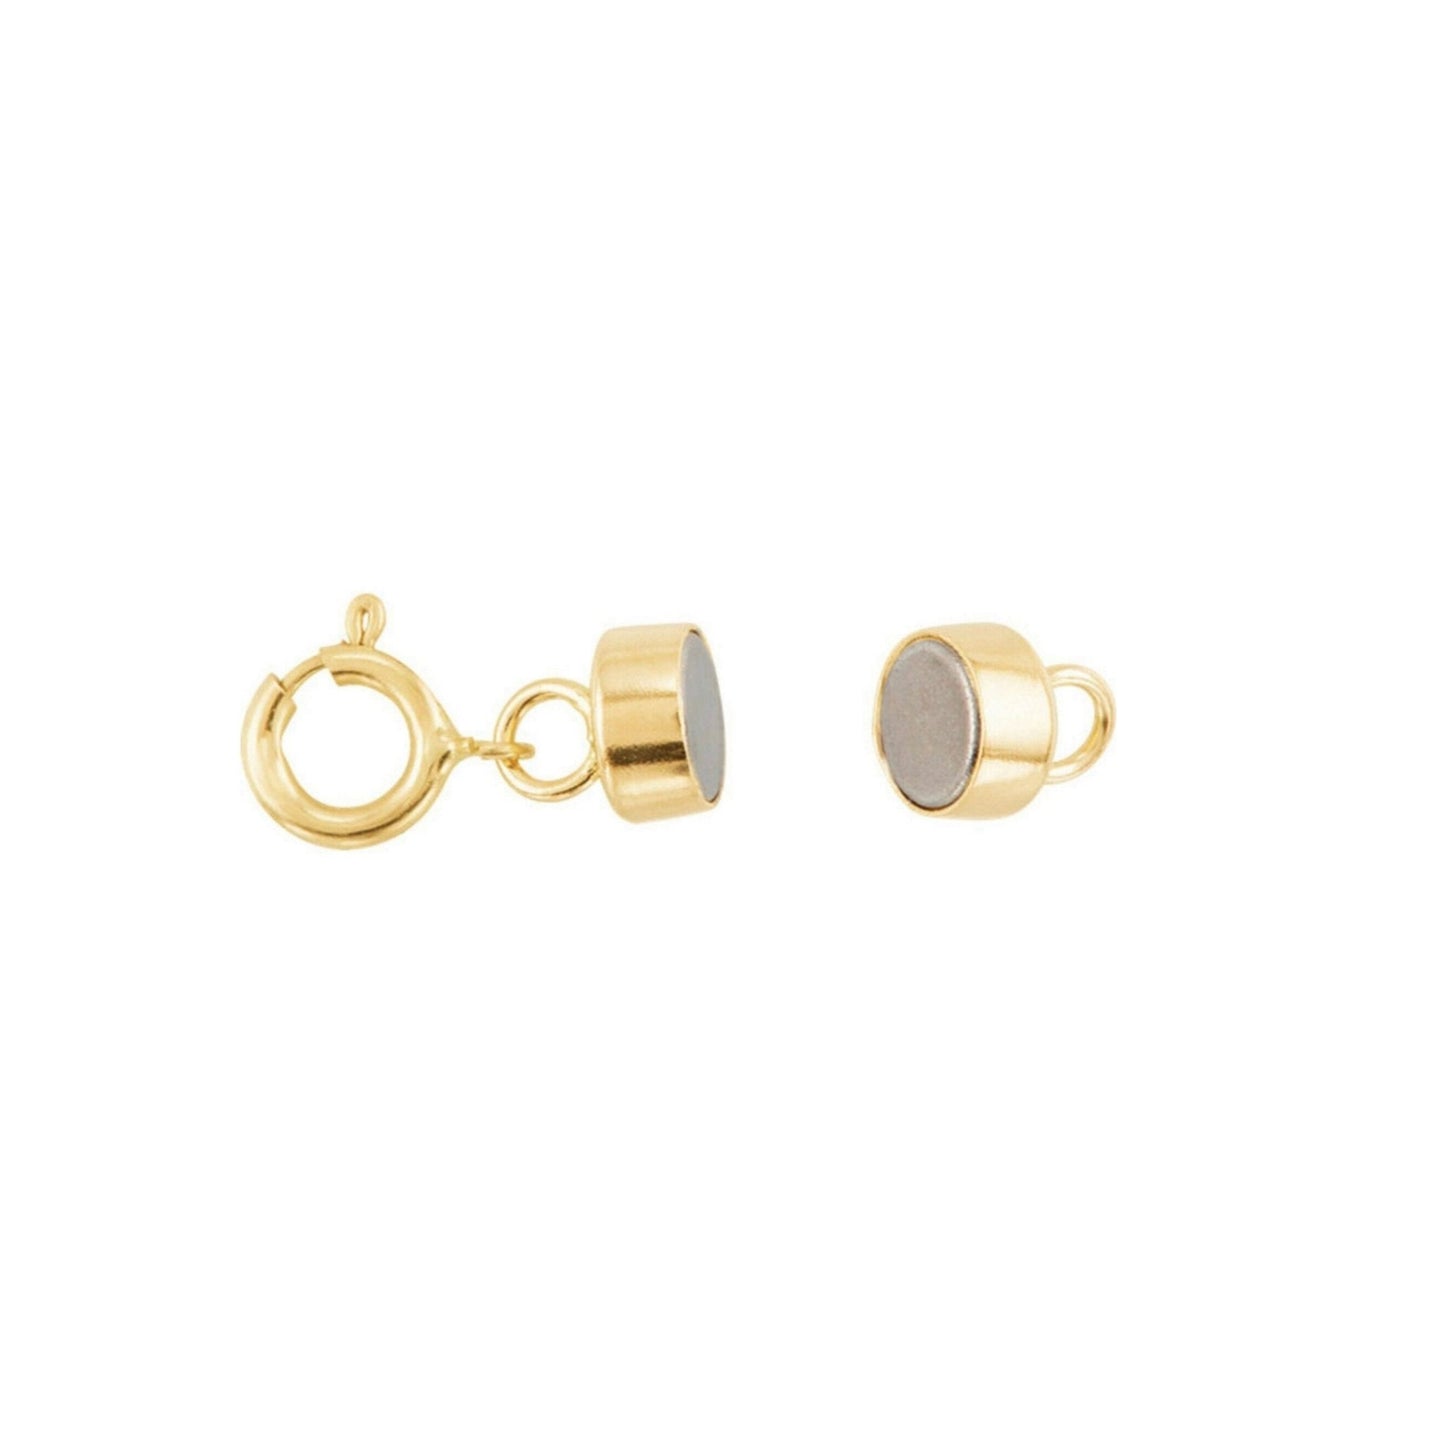 Solid Gold Magnetic Clasp Converter - Le Serey